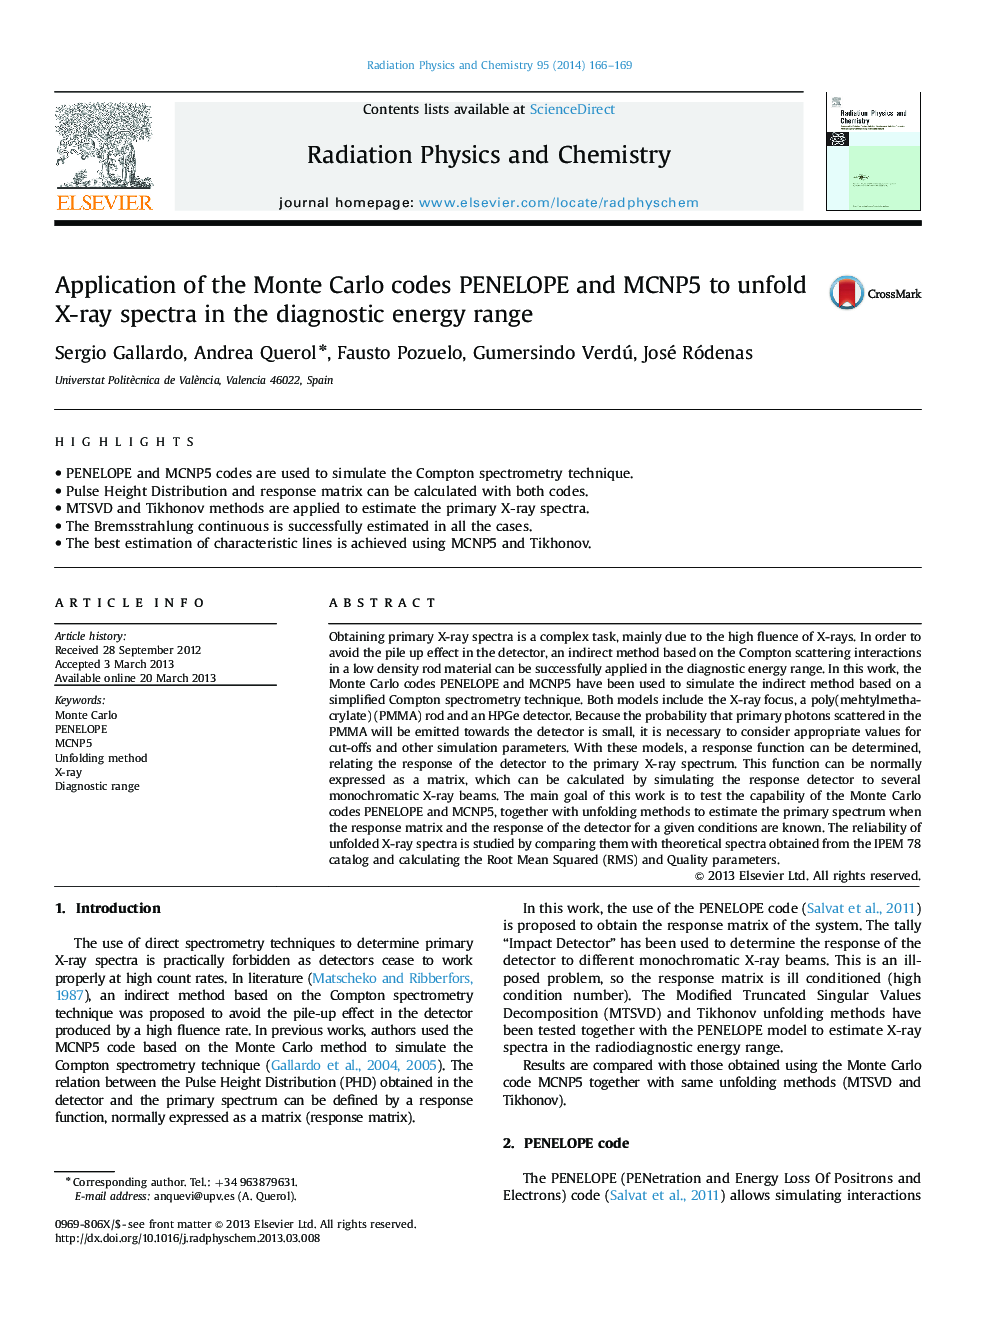 Application of the Monte Carlo codes PENELOPE and MCNP5 to unfold X-ray spectra in the diagnostic energy range